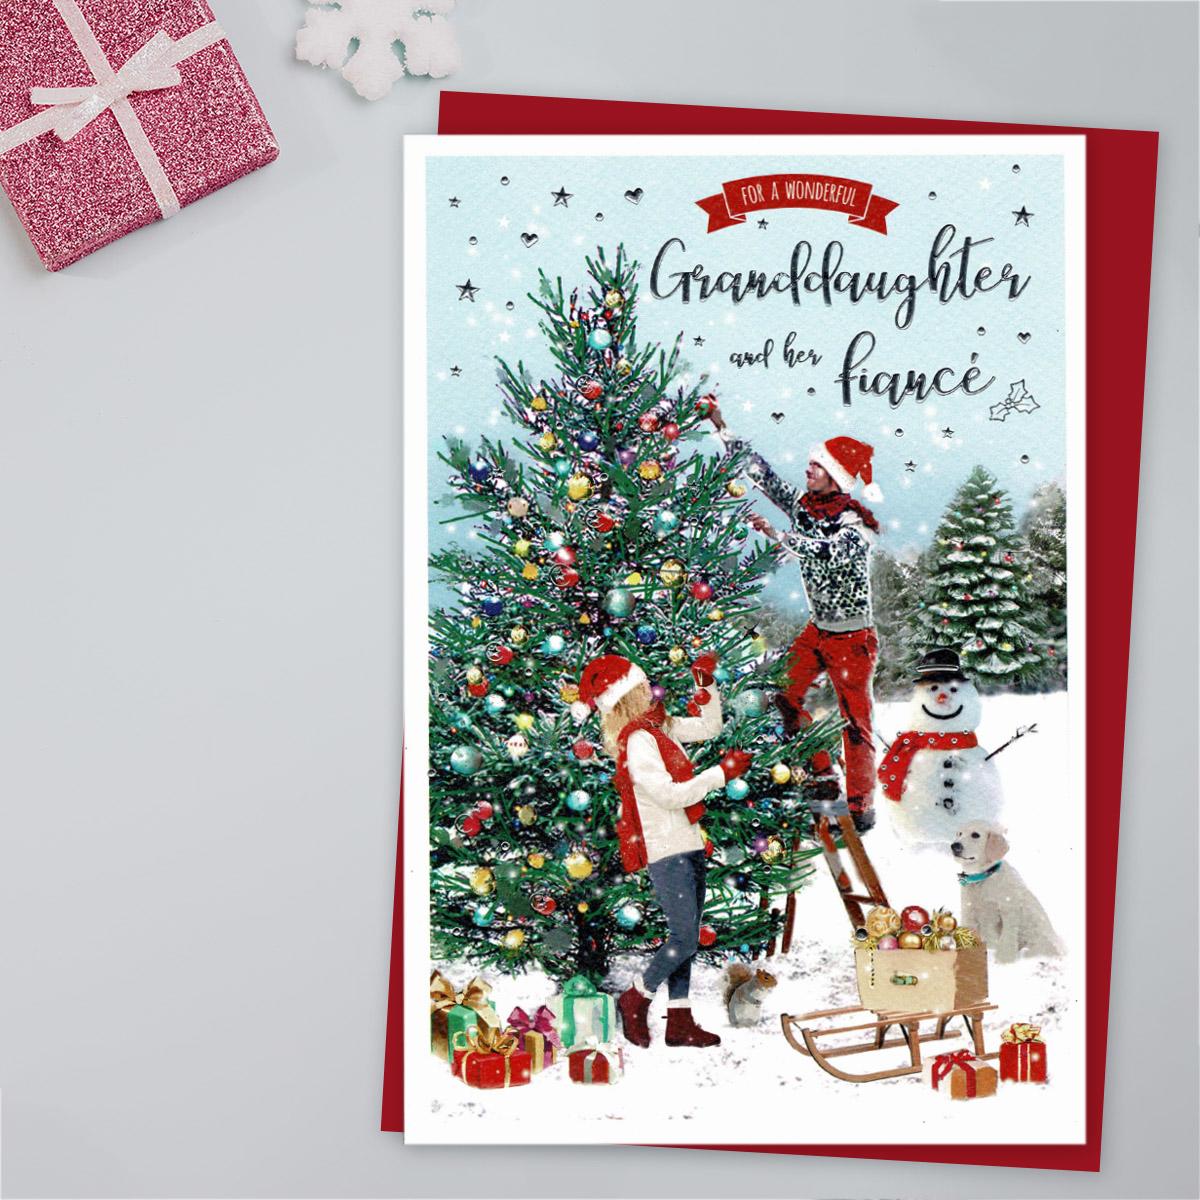 Wonderful Granddaughter And Fiancé Christmas Card Front Image